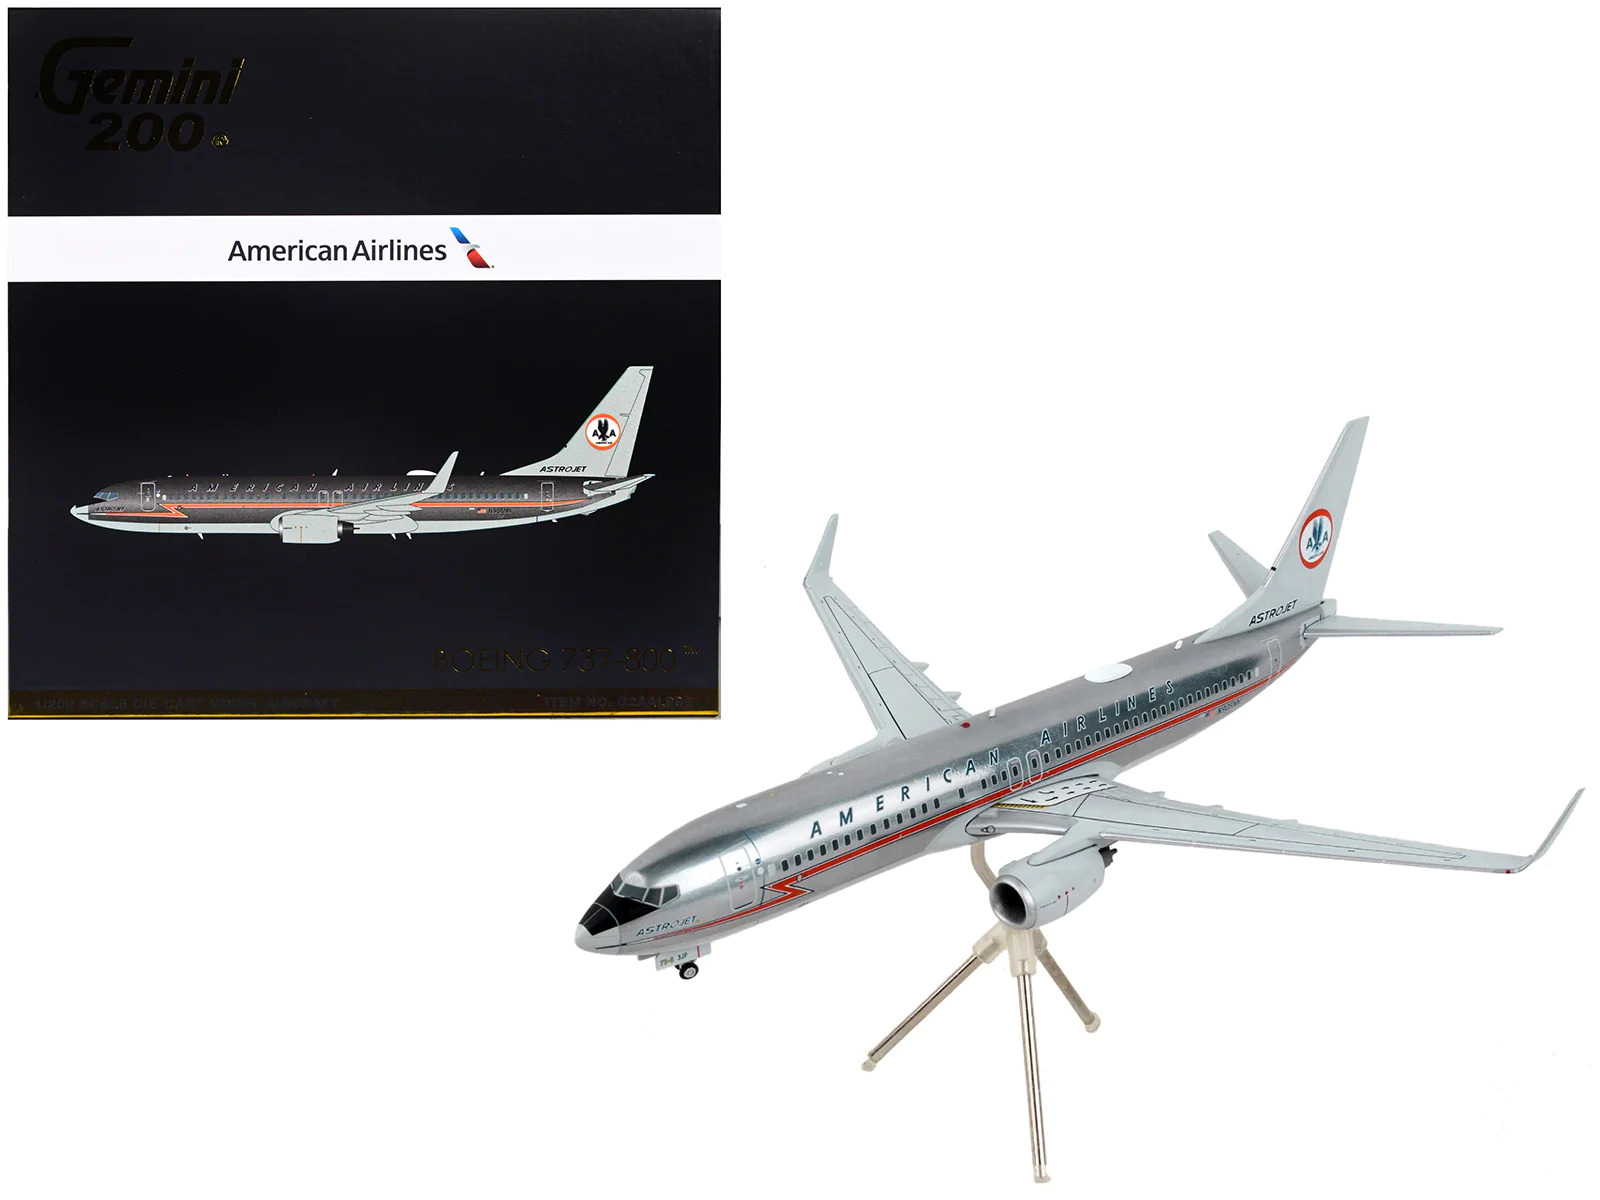 Boeing 737-800 Commercial Airlines - AstroJet 1/200 Diecast Model Airplane